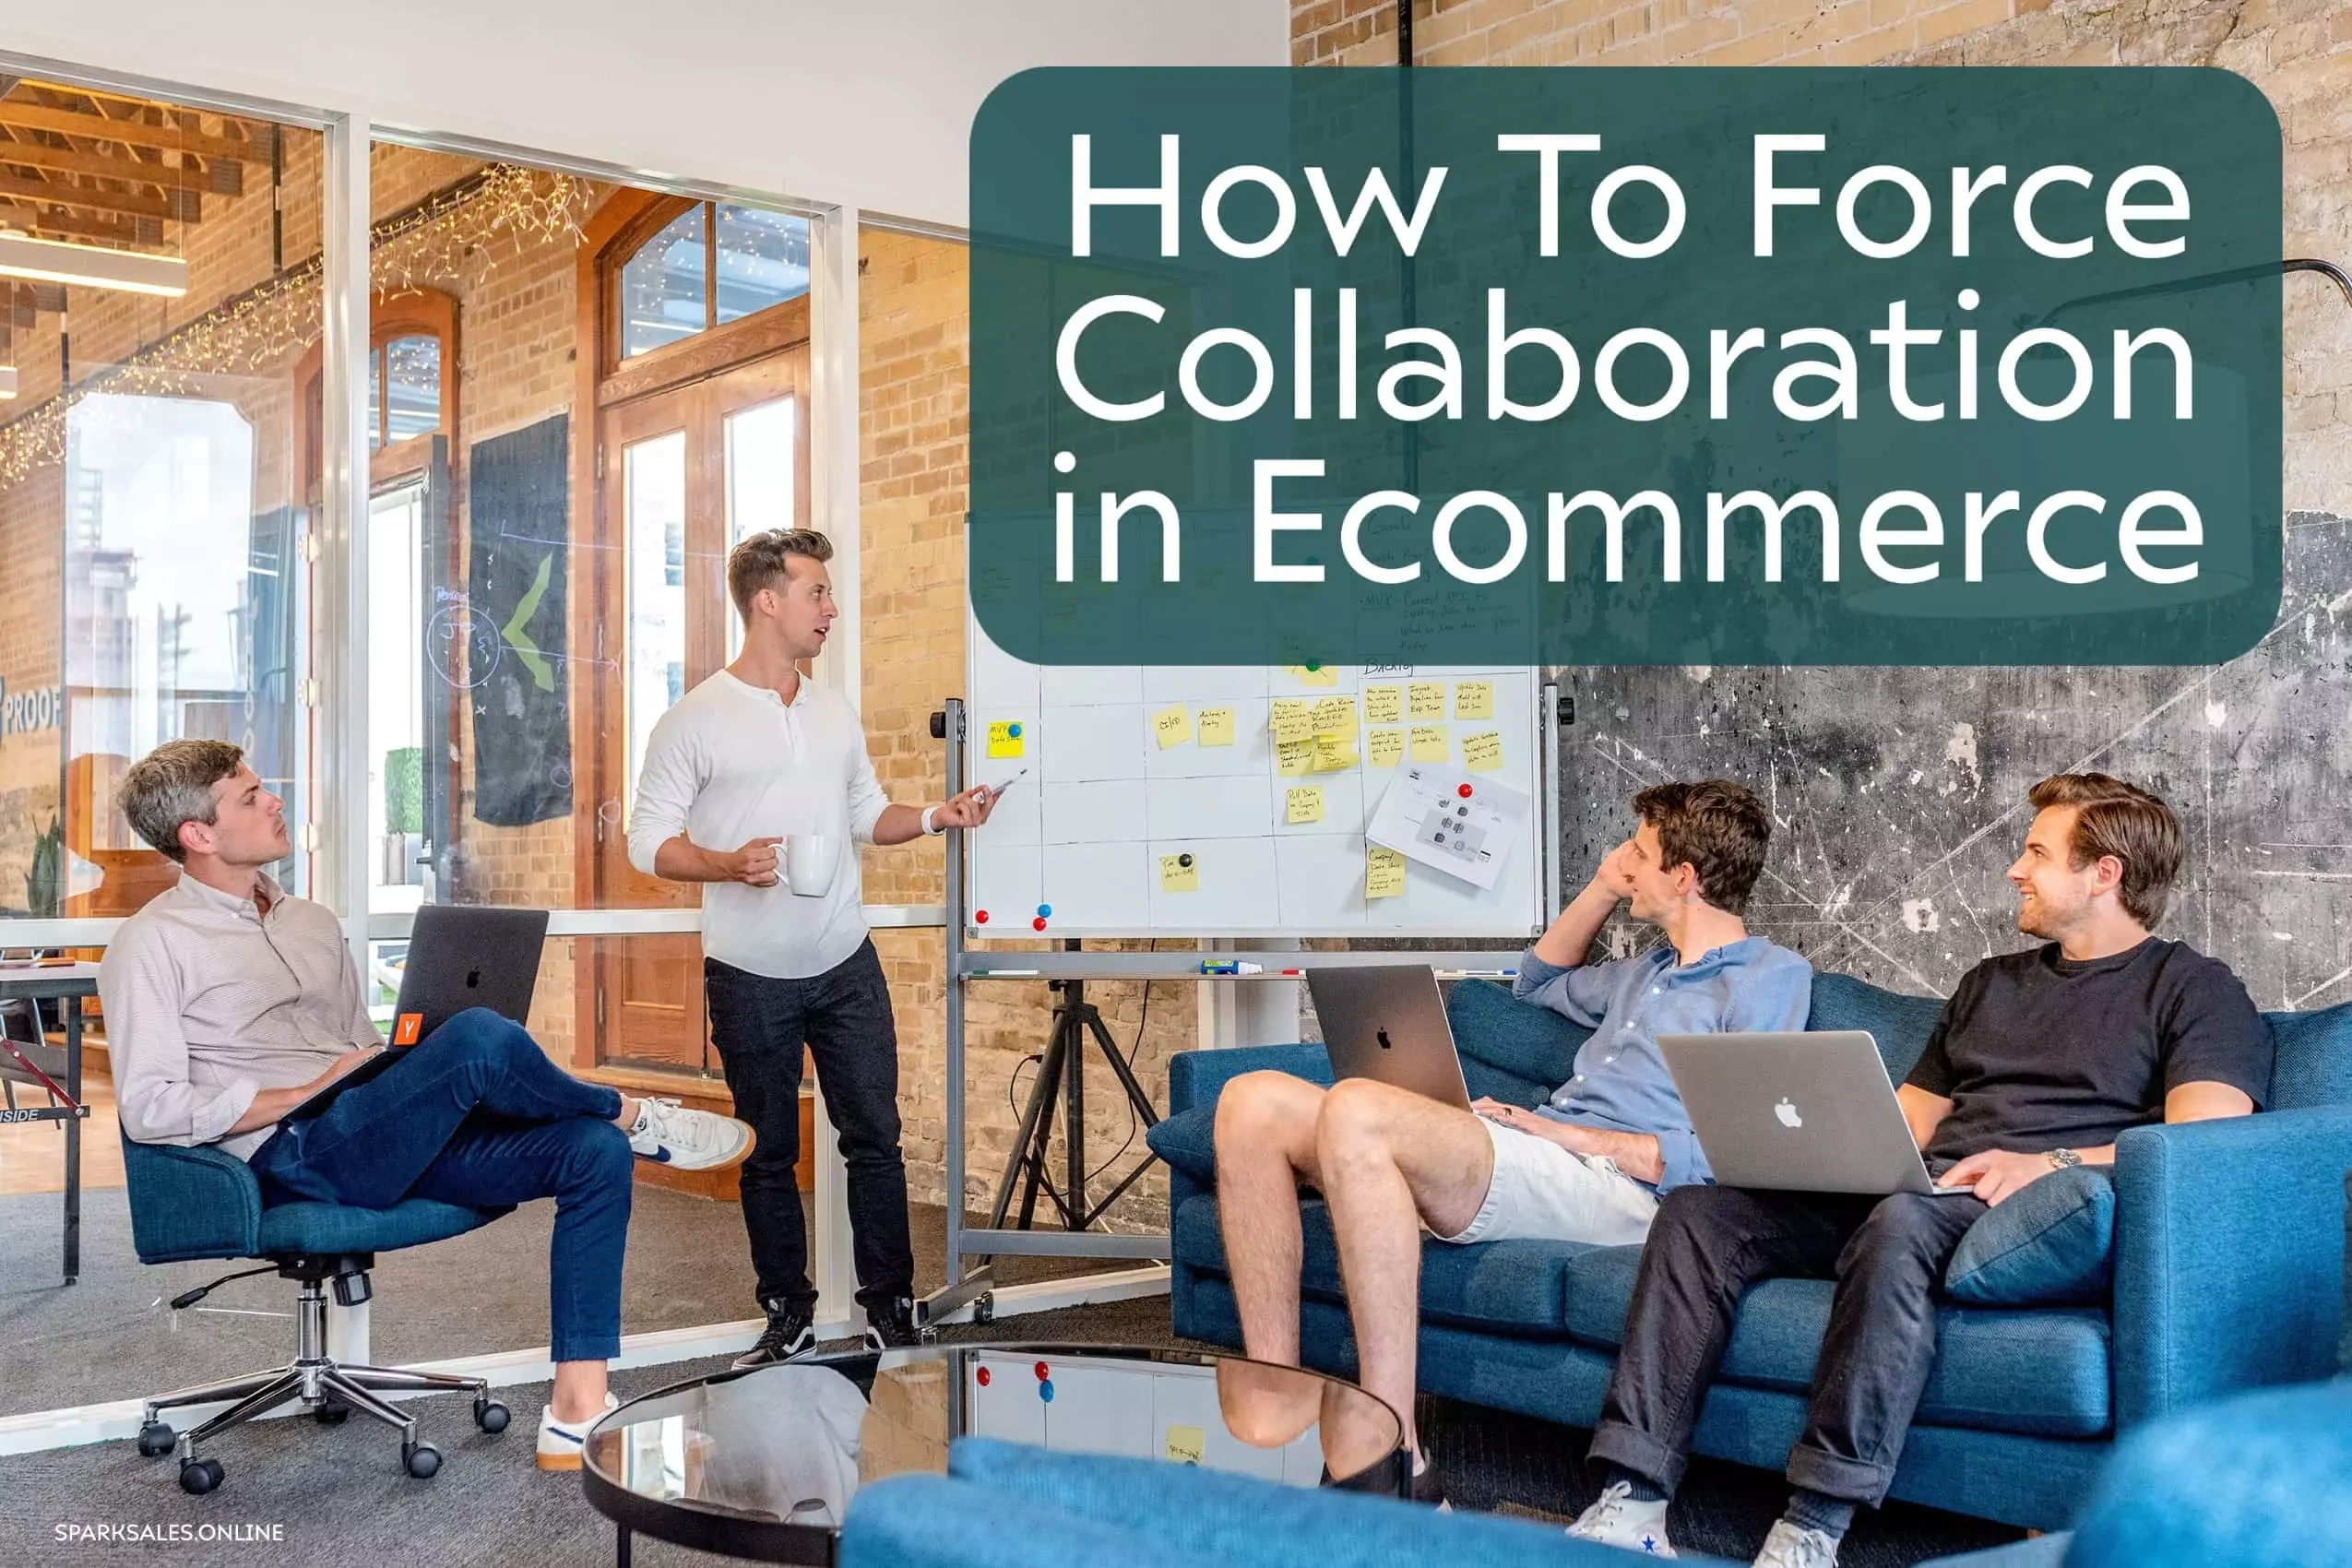 How To Force Collaboration in Ecommerce